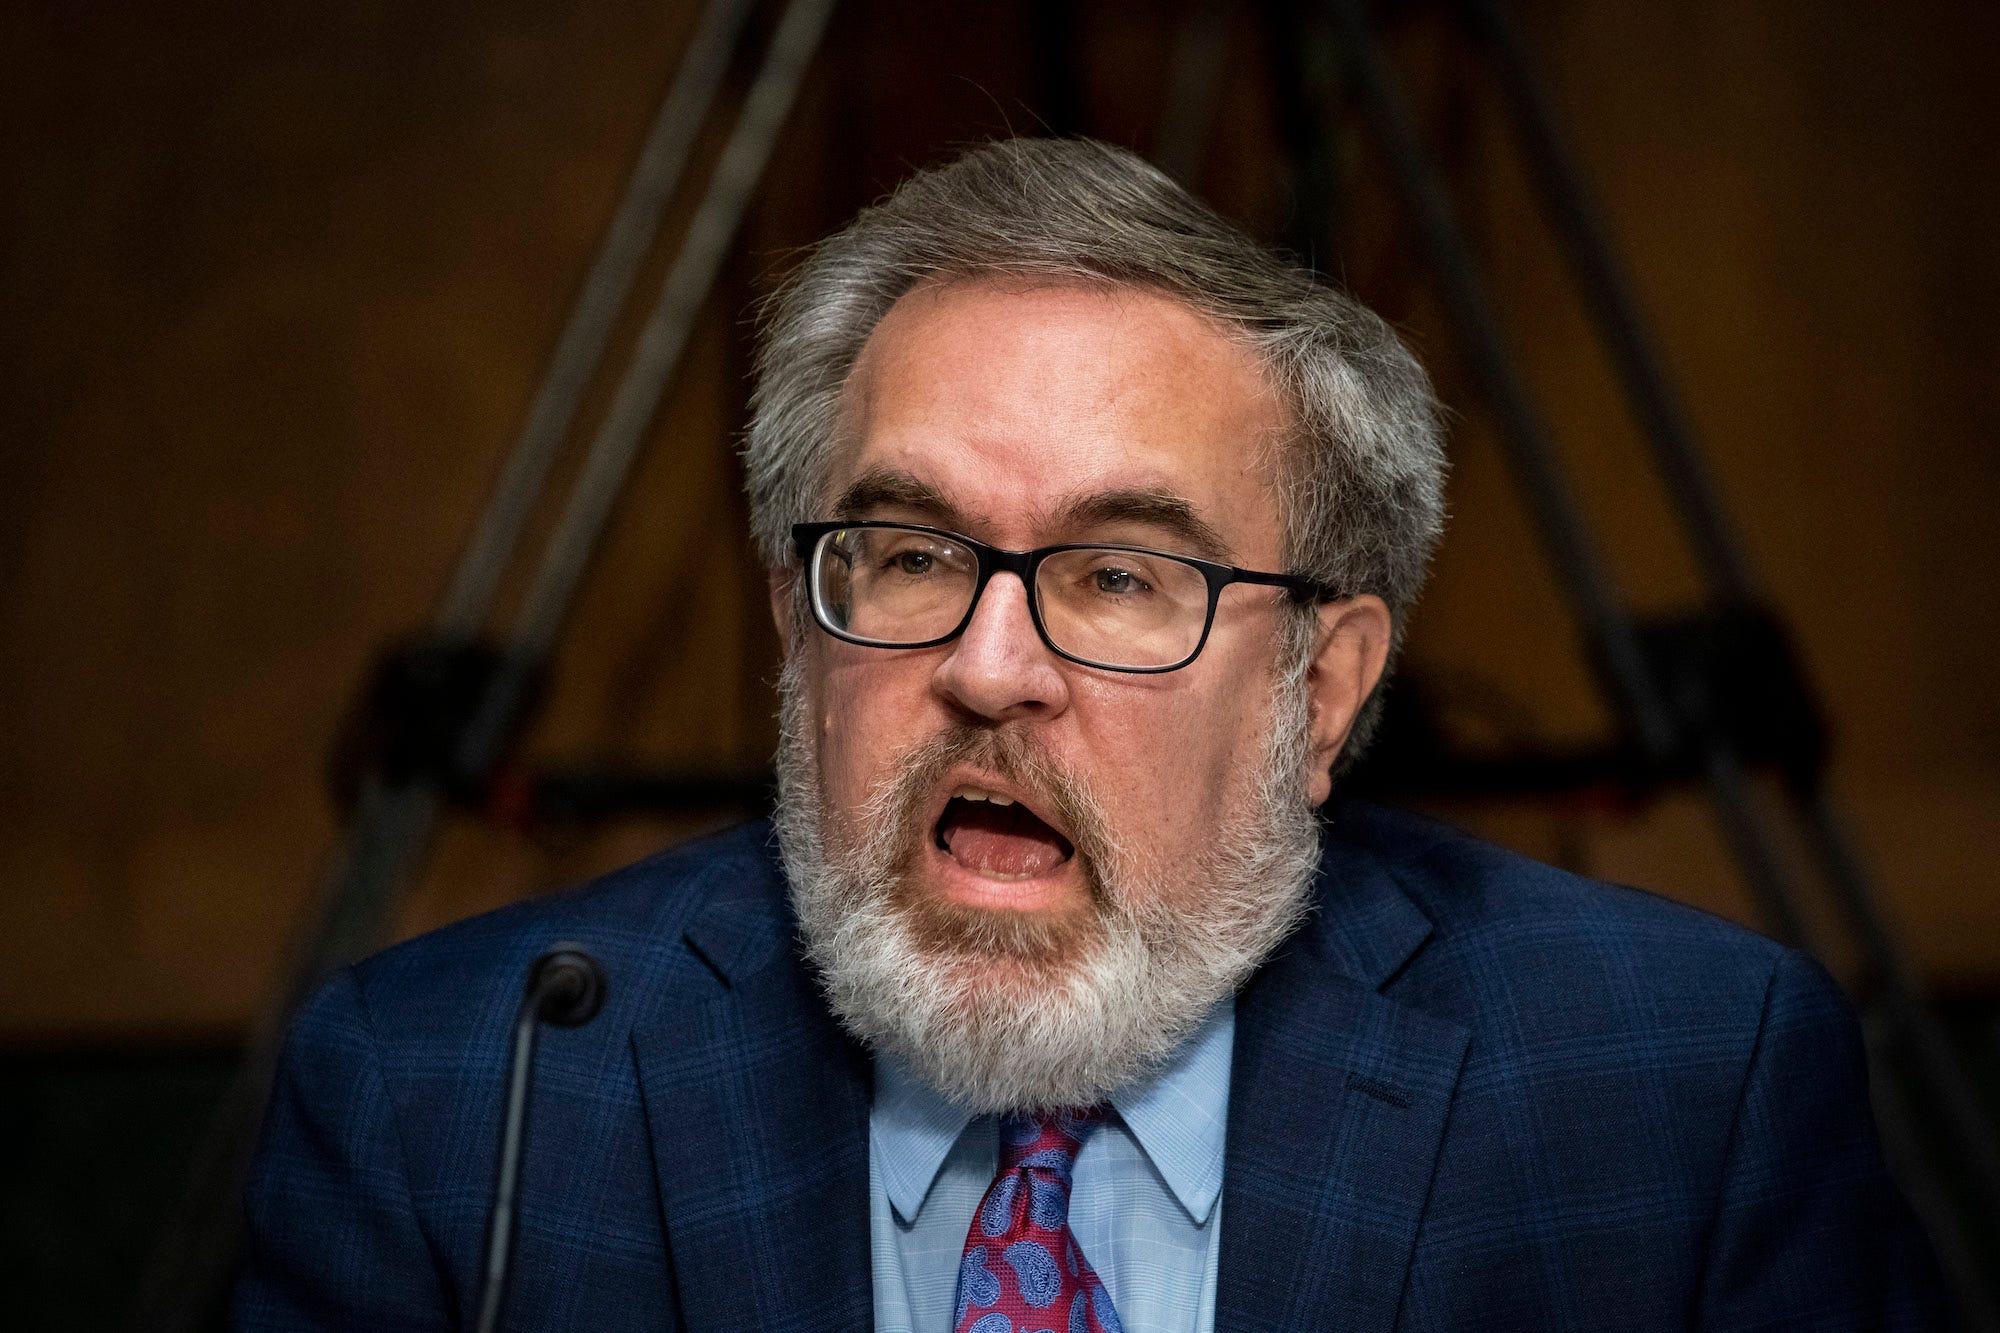 Environmental Protection Agency administrator Andrew Wheeler, caught mid-speech with his mouth wide open, addresses lawmakers during a hearing on Capitol Hill.